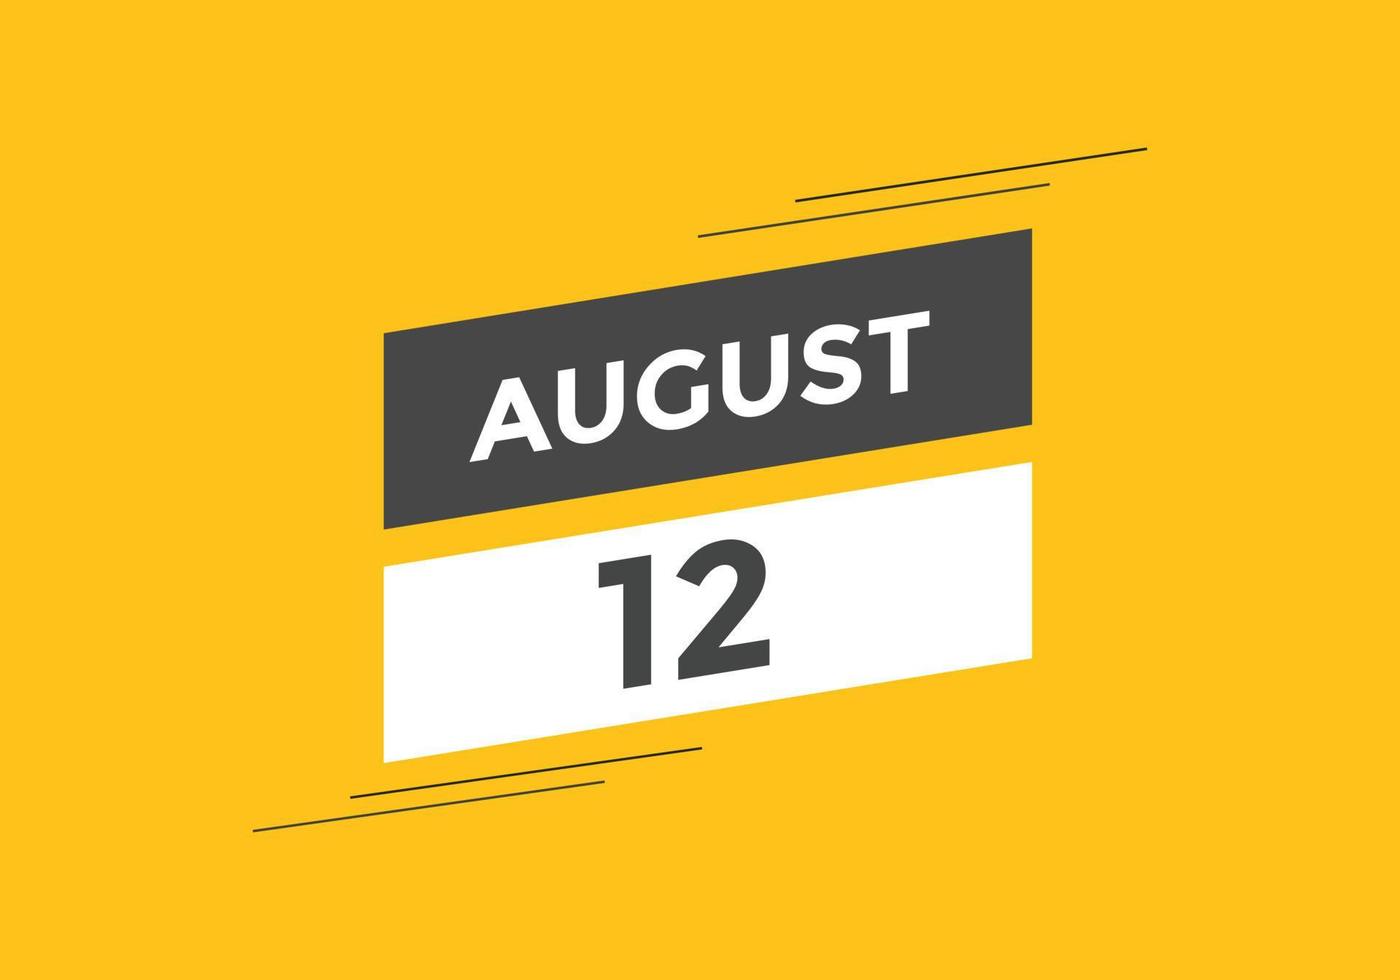 august 12 calendar reminder. 12th august daily calendar icon template. Calendar 12th august icon Design template. Vector illustration